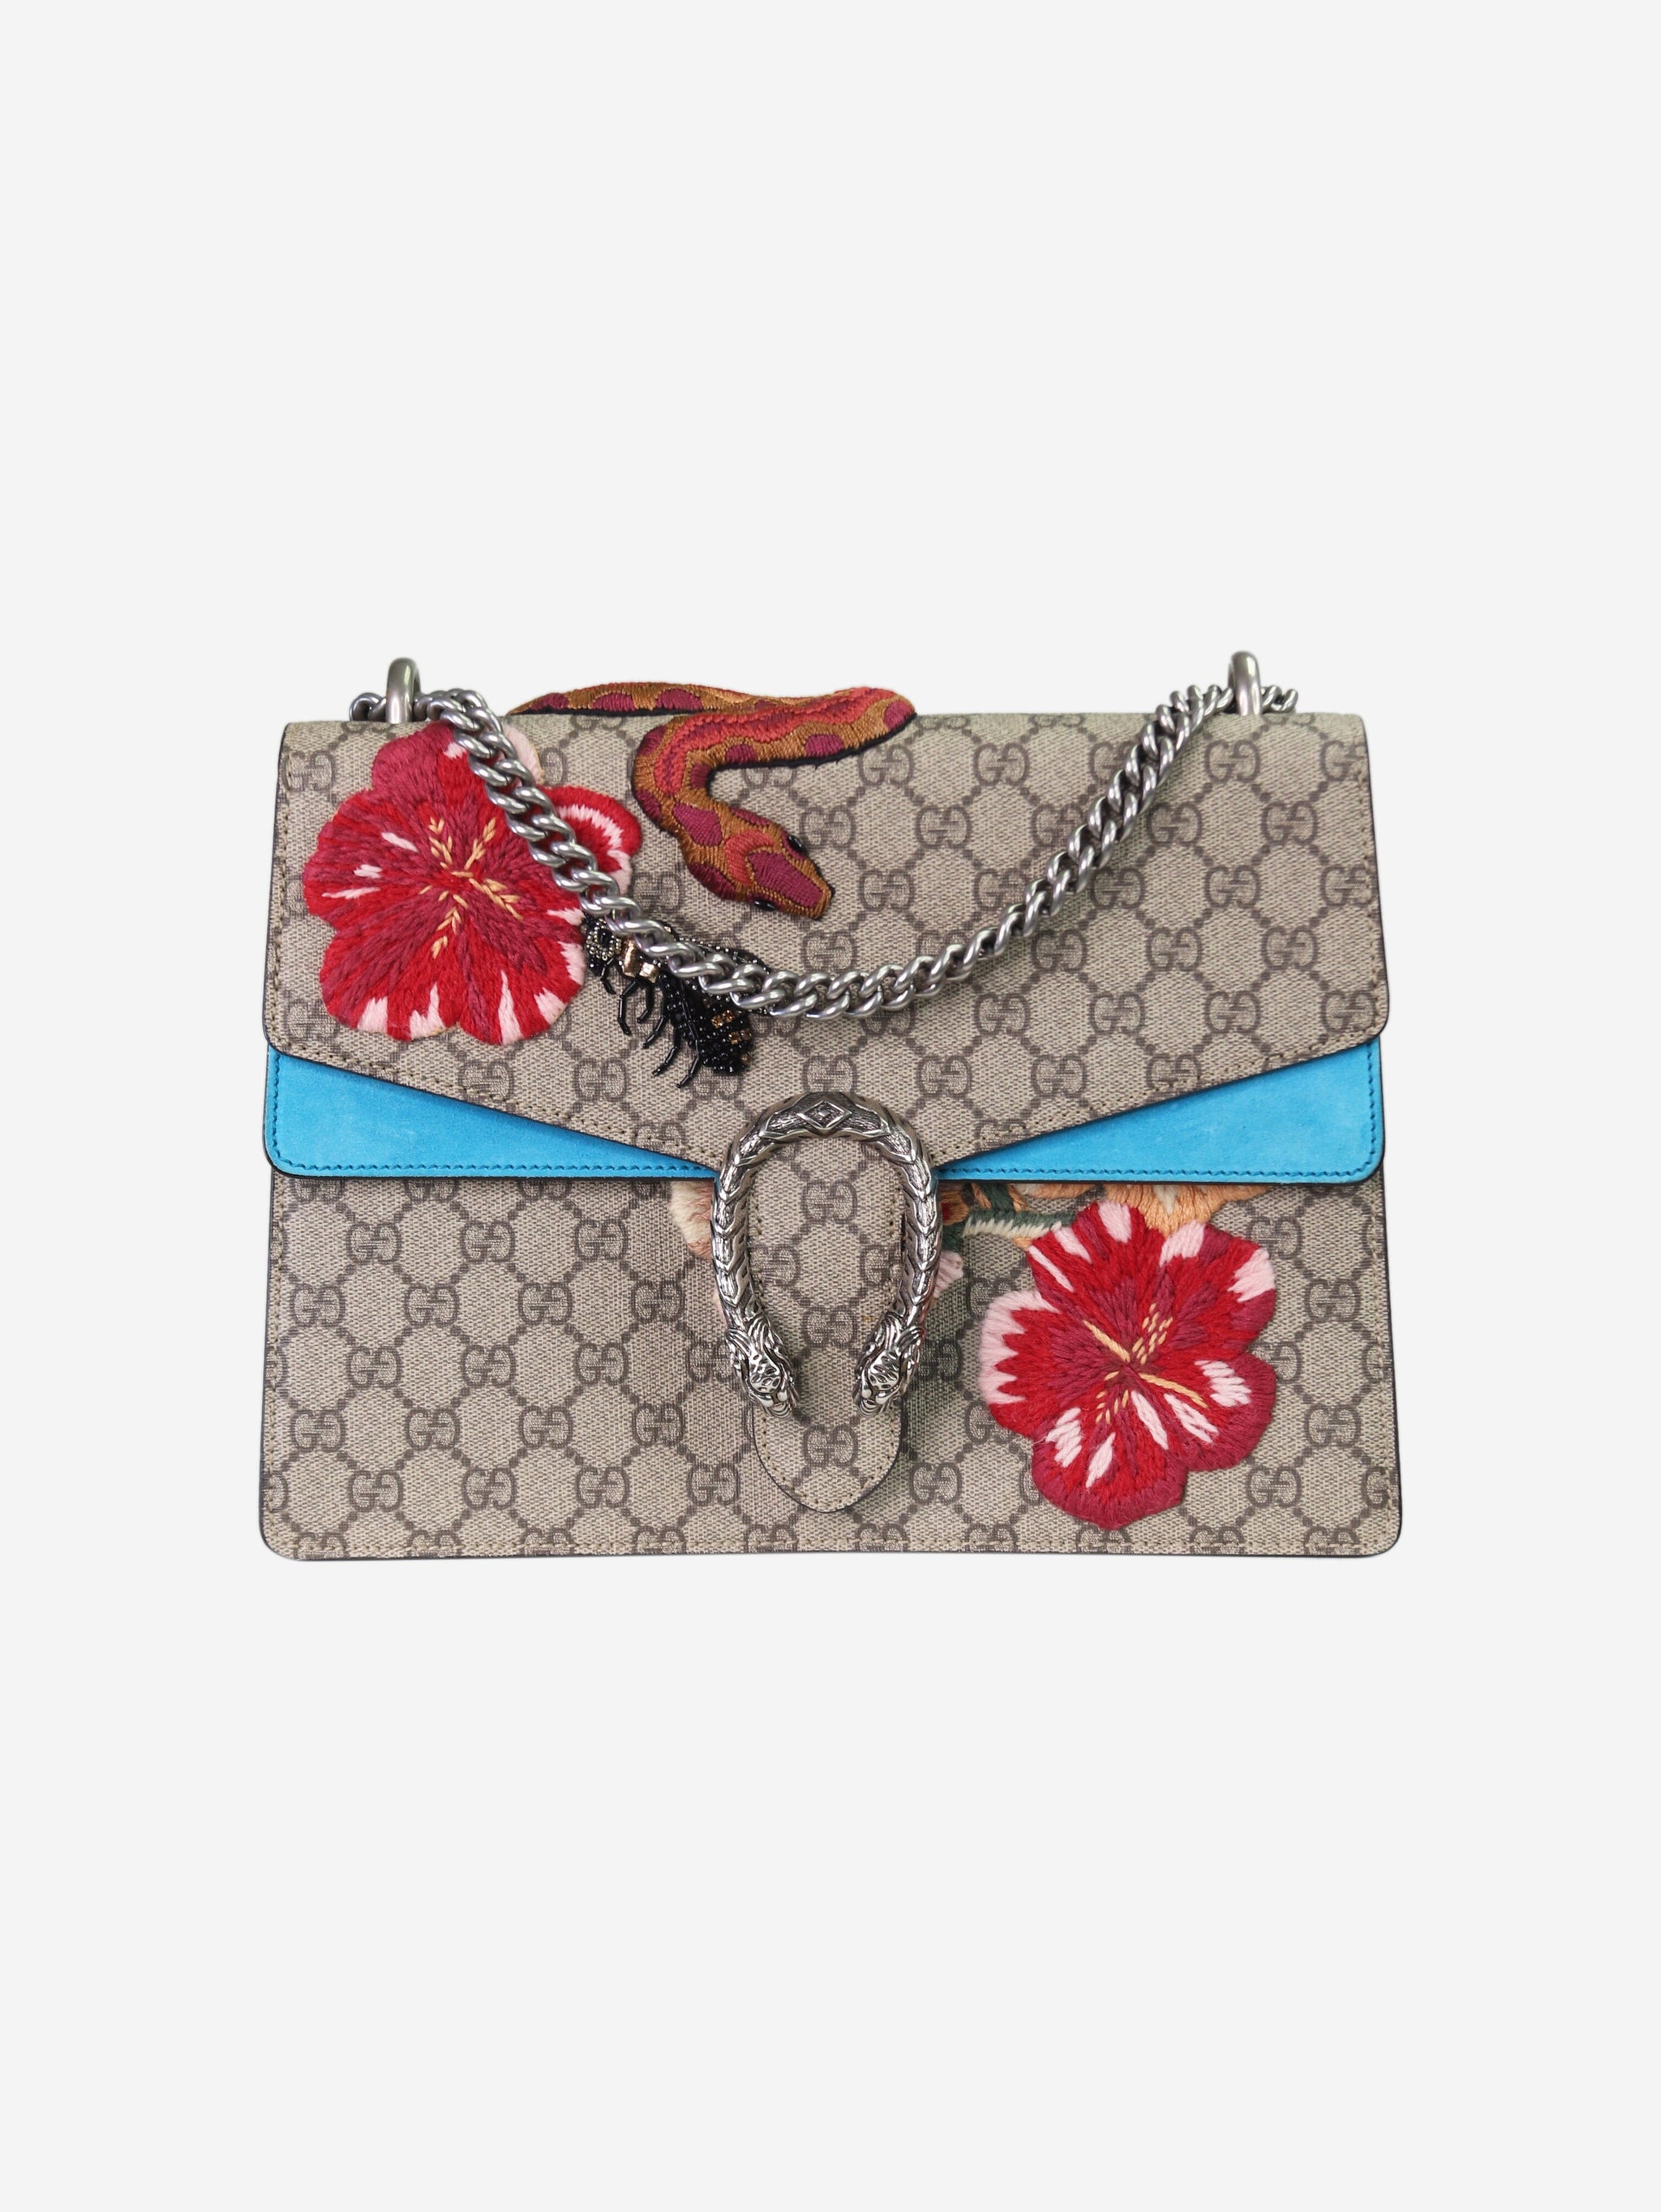 Gucci Small Dionysus Snakeskin Limited Edition New - 11 x 7 x 3.5 inches /  Canvas | Gucci bag, Gucci, Shoulder bag